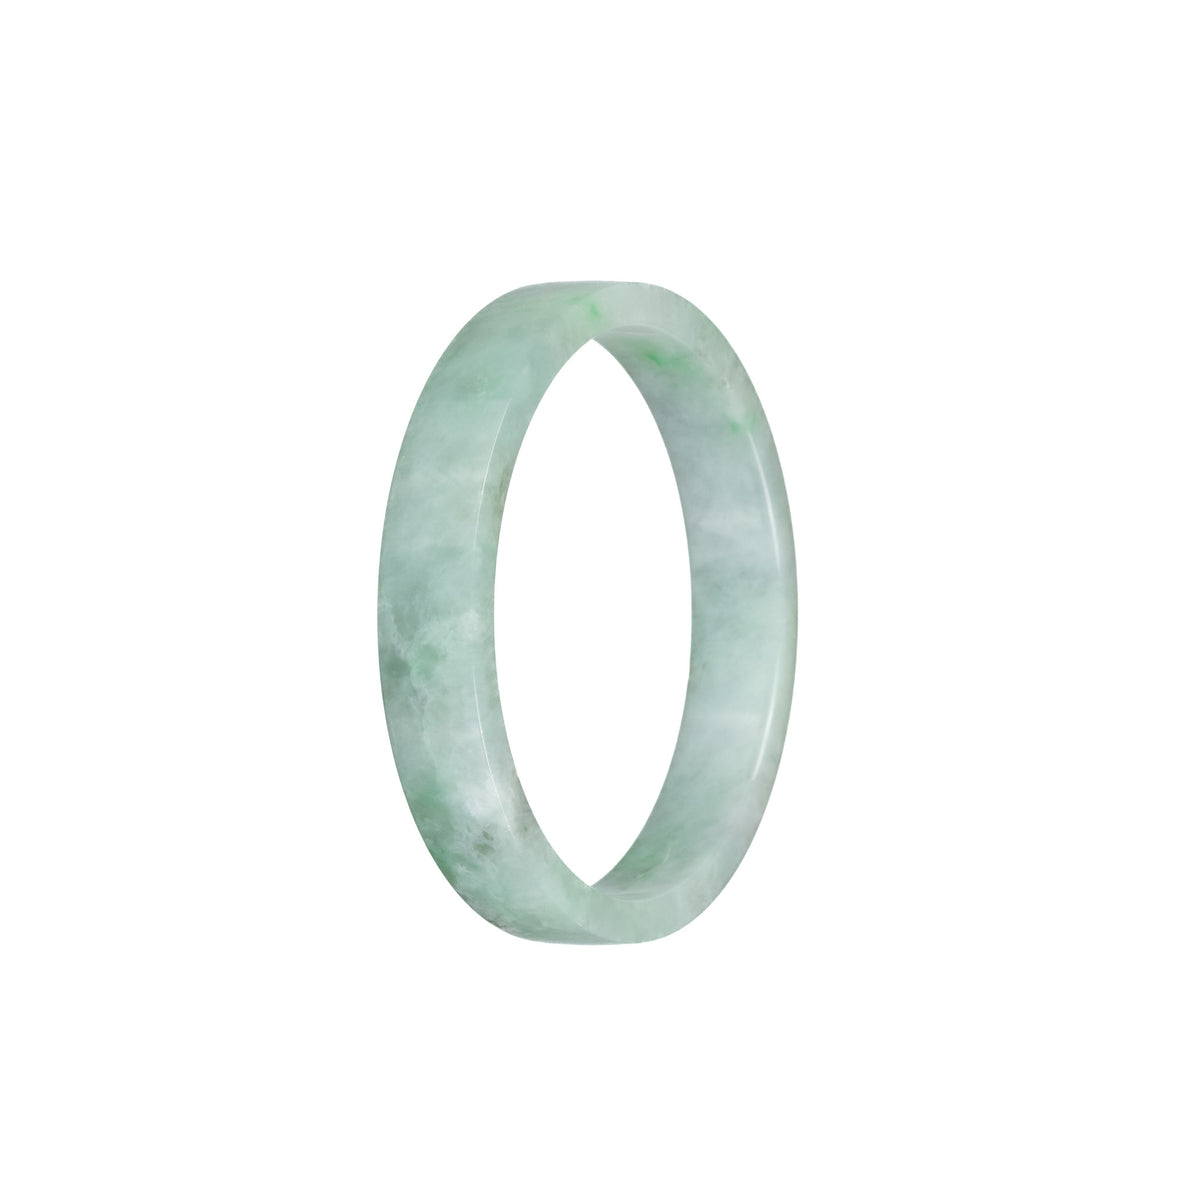 Certified Type A Pale Green with Green Pattern Traditional Jade Bangle - 52mm Flat